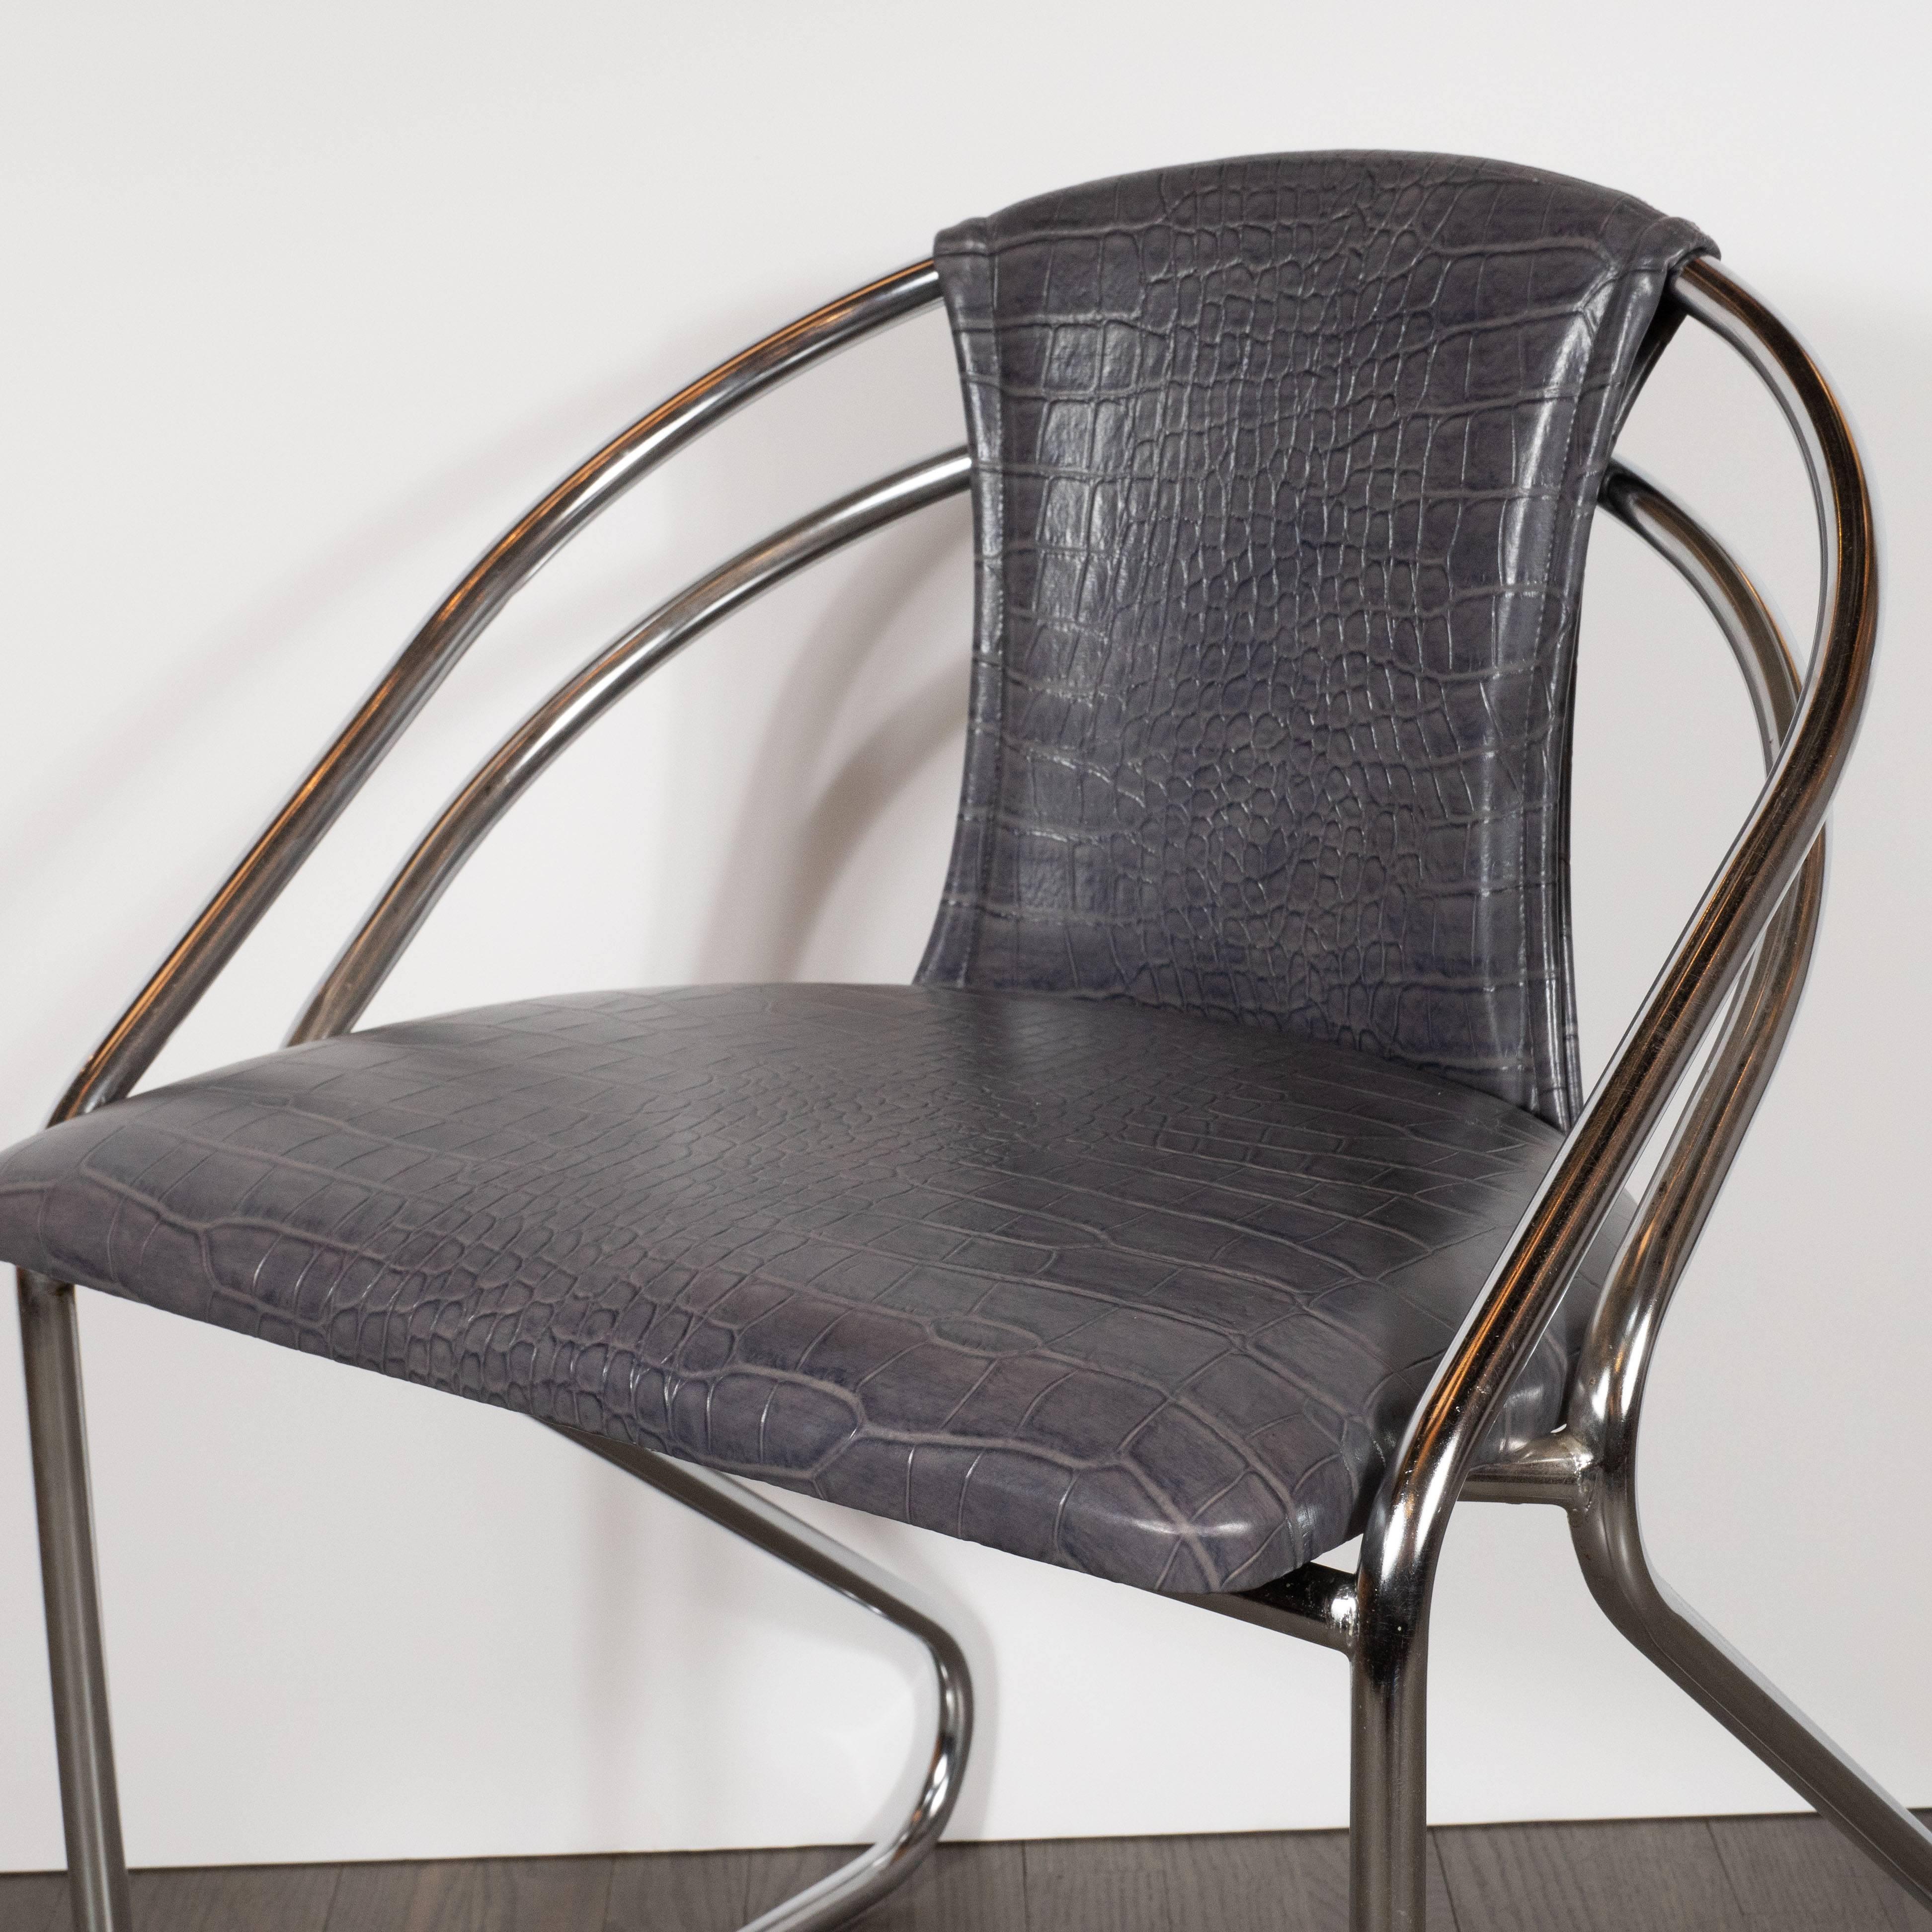 This stunning chair was realized in the United States, circa 1935. The body is composed of bent tubular chrome supports. The base is a triangular form with curved corners that ascends upwards, bending at the seat to form the two barrel back slats.